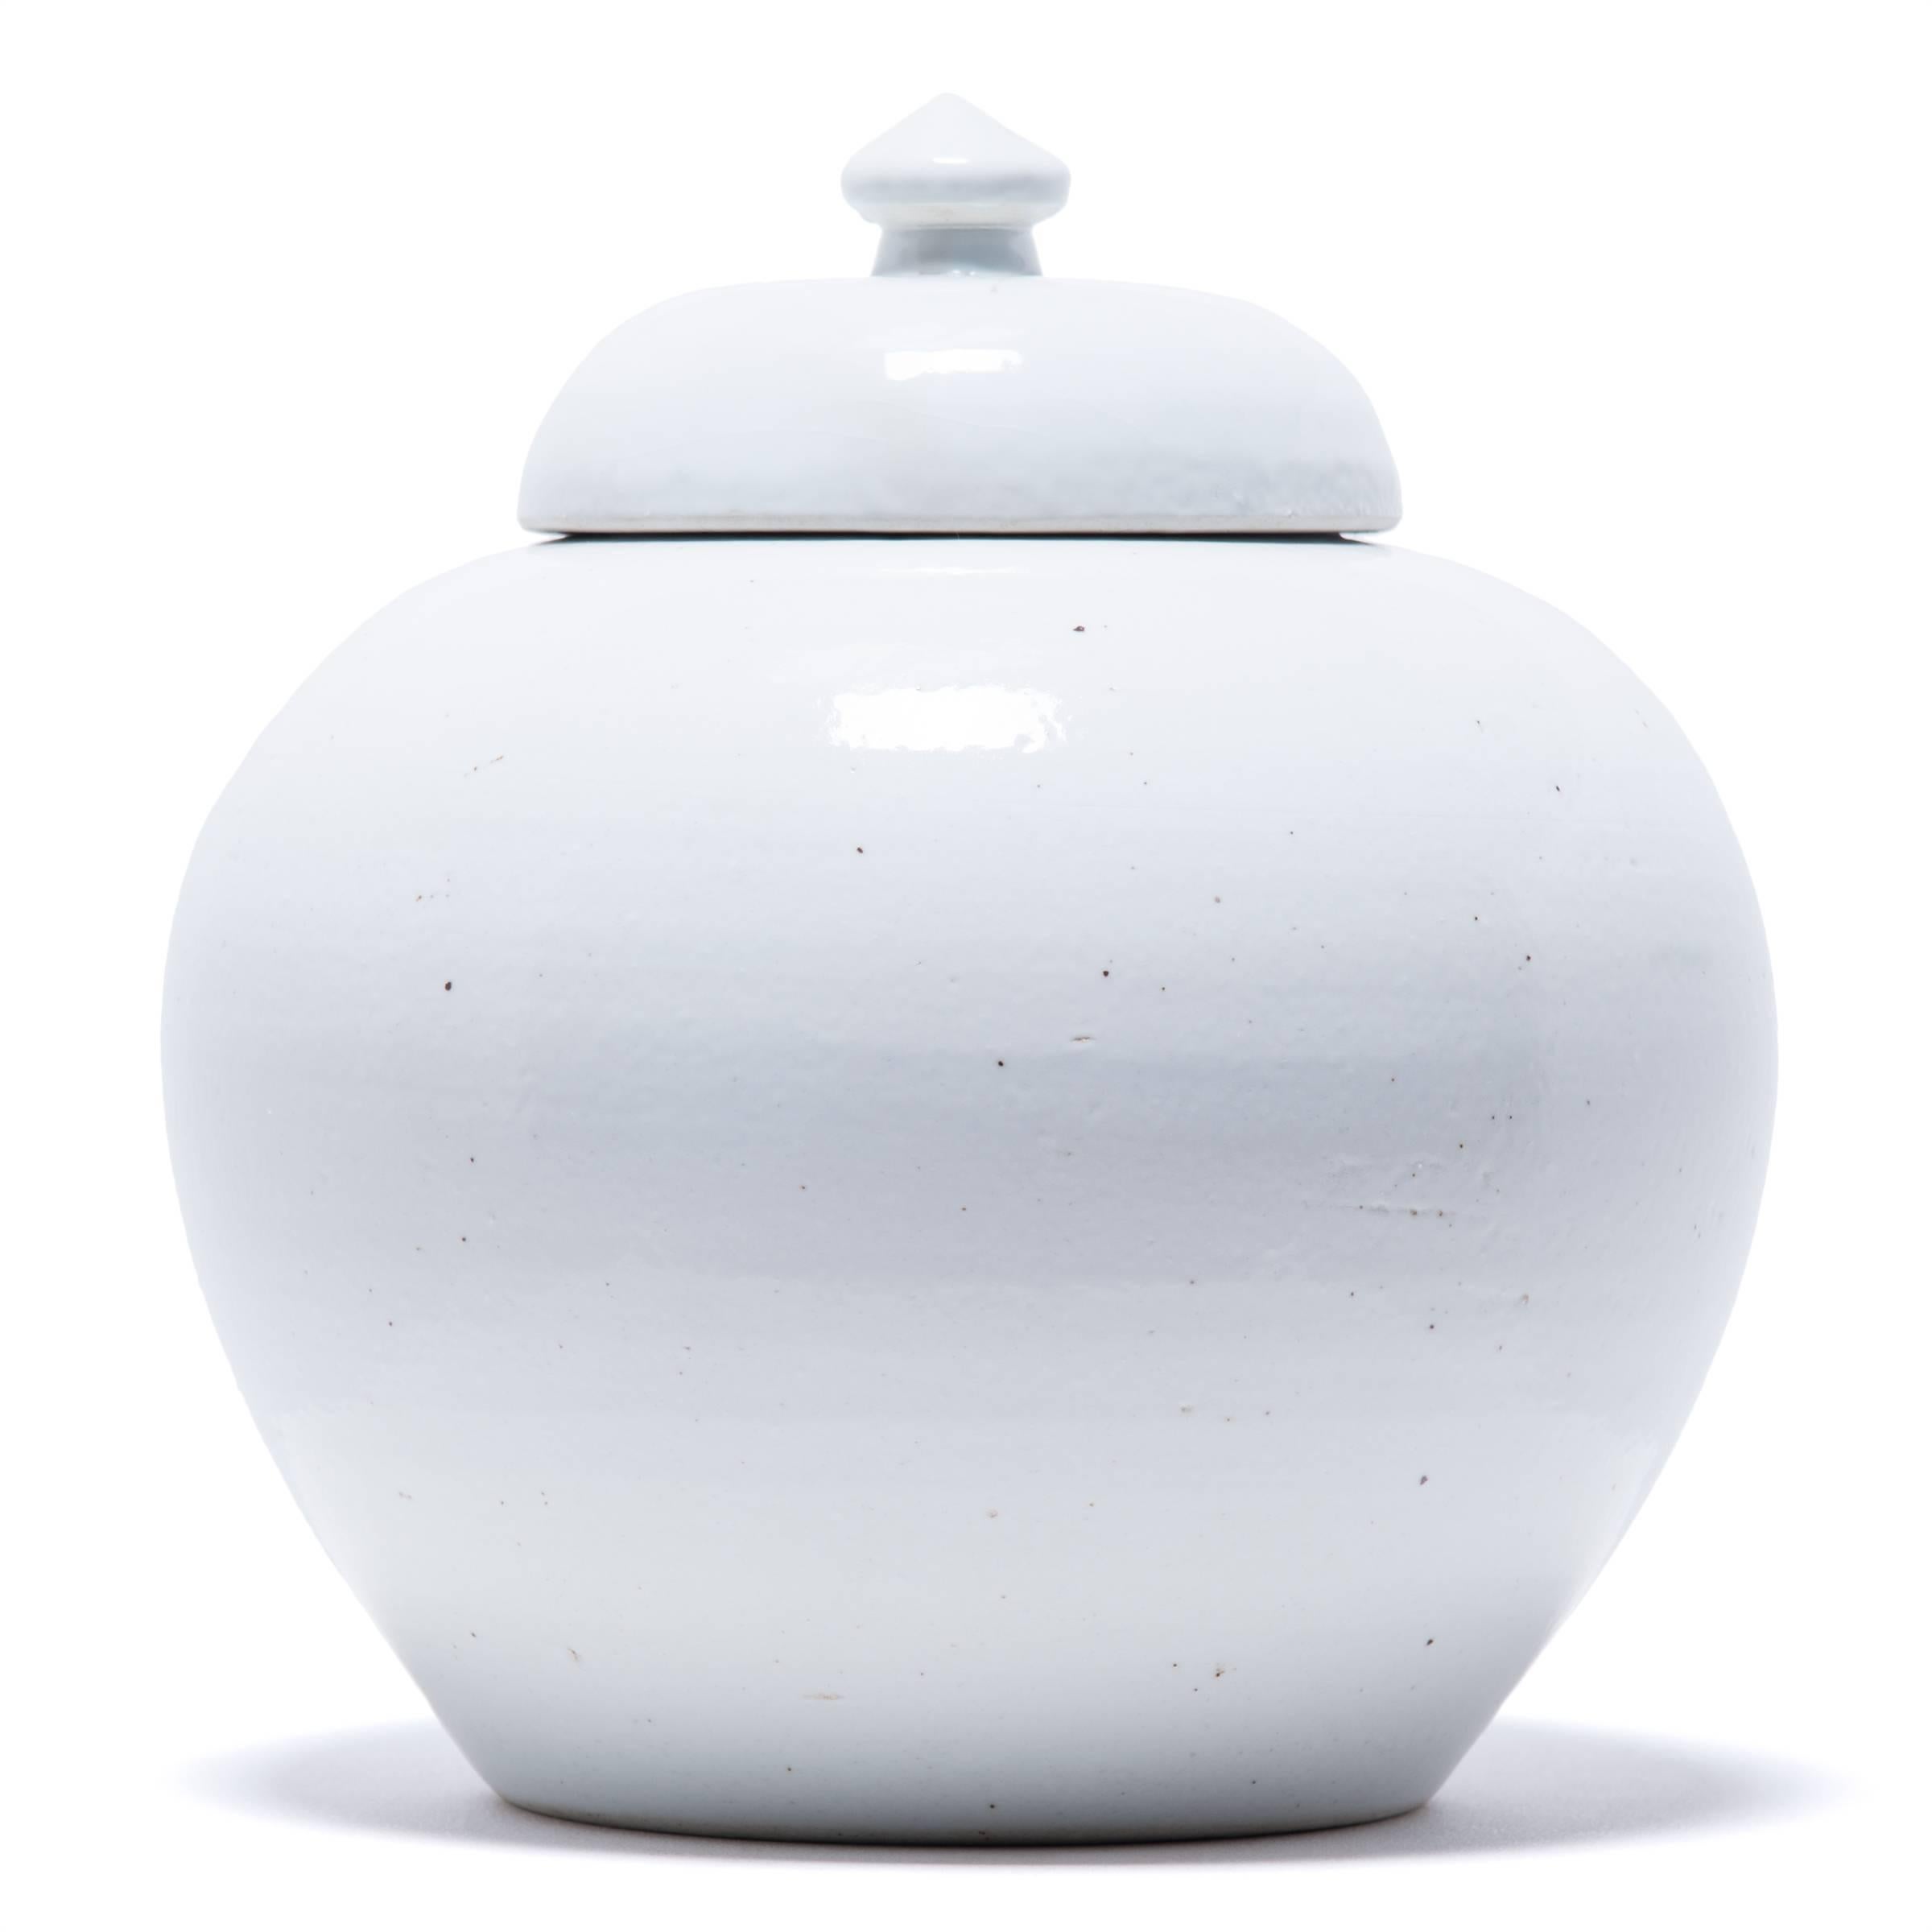 The hand-applied milky glaze on this stoneware container emphasizes the sculptural form of this contemporary update on a Chinese Classic. Refining the traditional onion shape, the quiet monochrome plays beautifully with its clean lines and